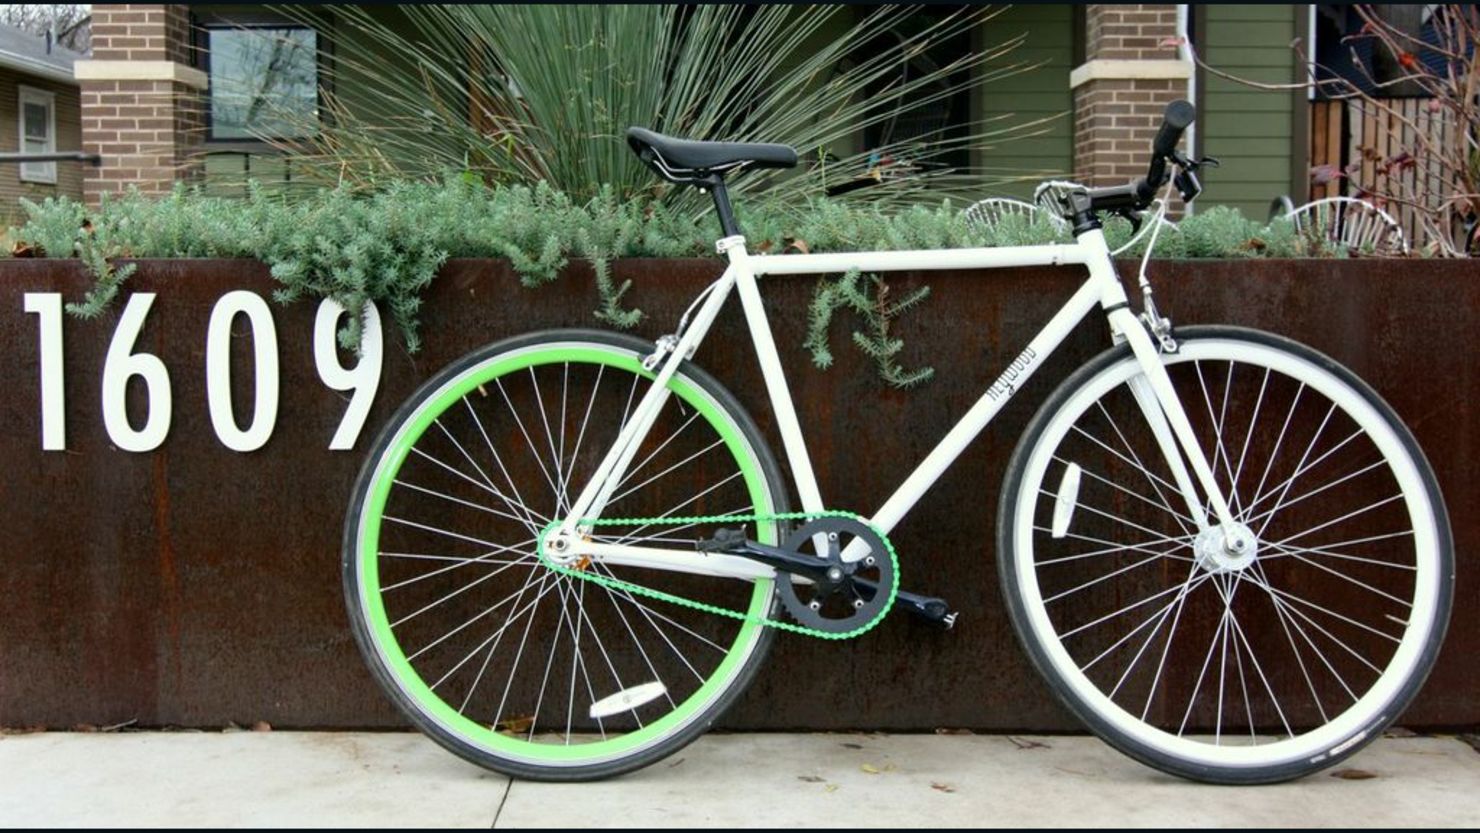 Austin's Heywood Hotel offers guests complimentary access to sweet rides such as this Republic bicycle.